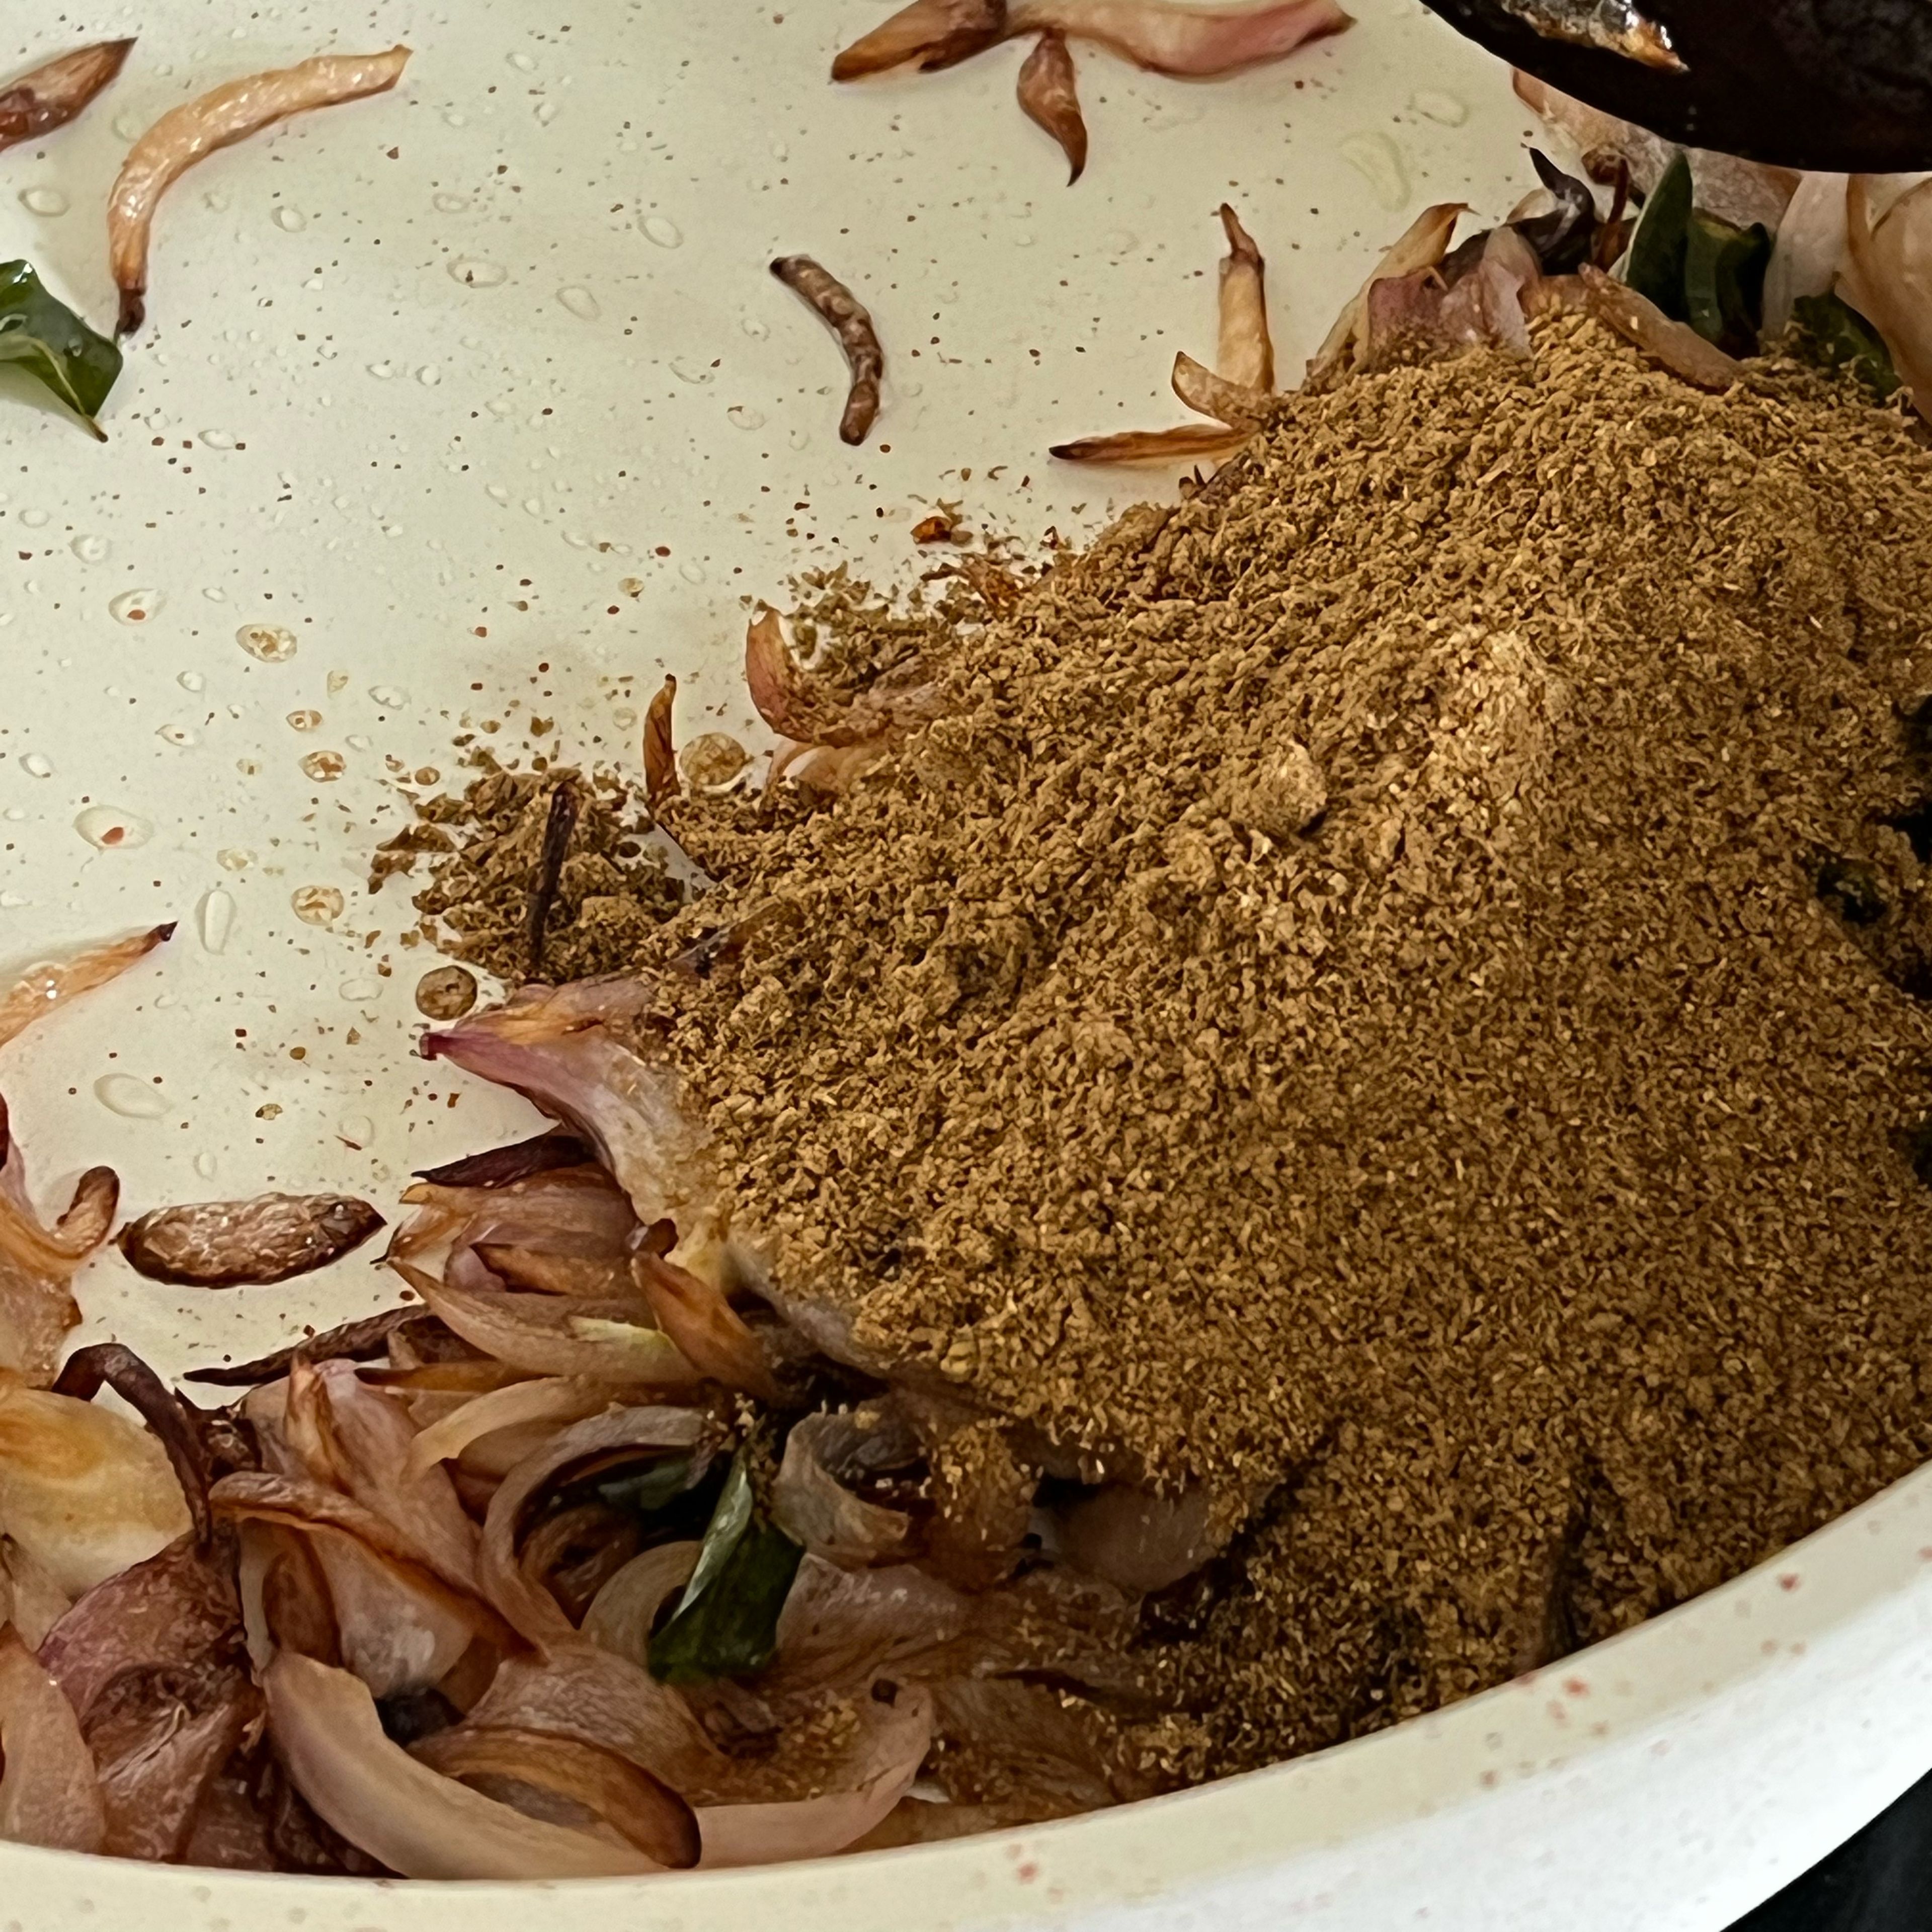 Add the curry leaves and sauté for a minute. (You can also add a diced tomato if you want a bit more tanginess.) Add the rest of the masalas - garam masala, coriander powder & pepper. 